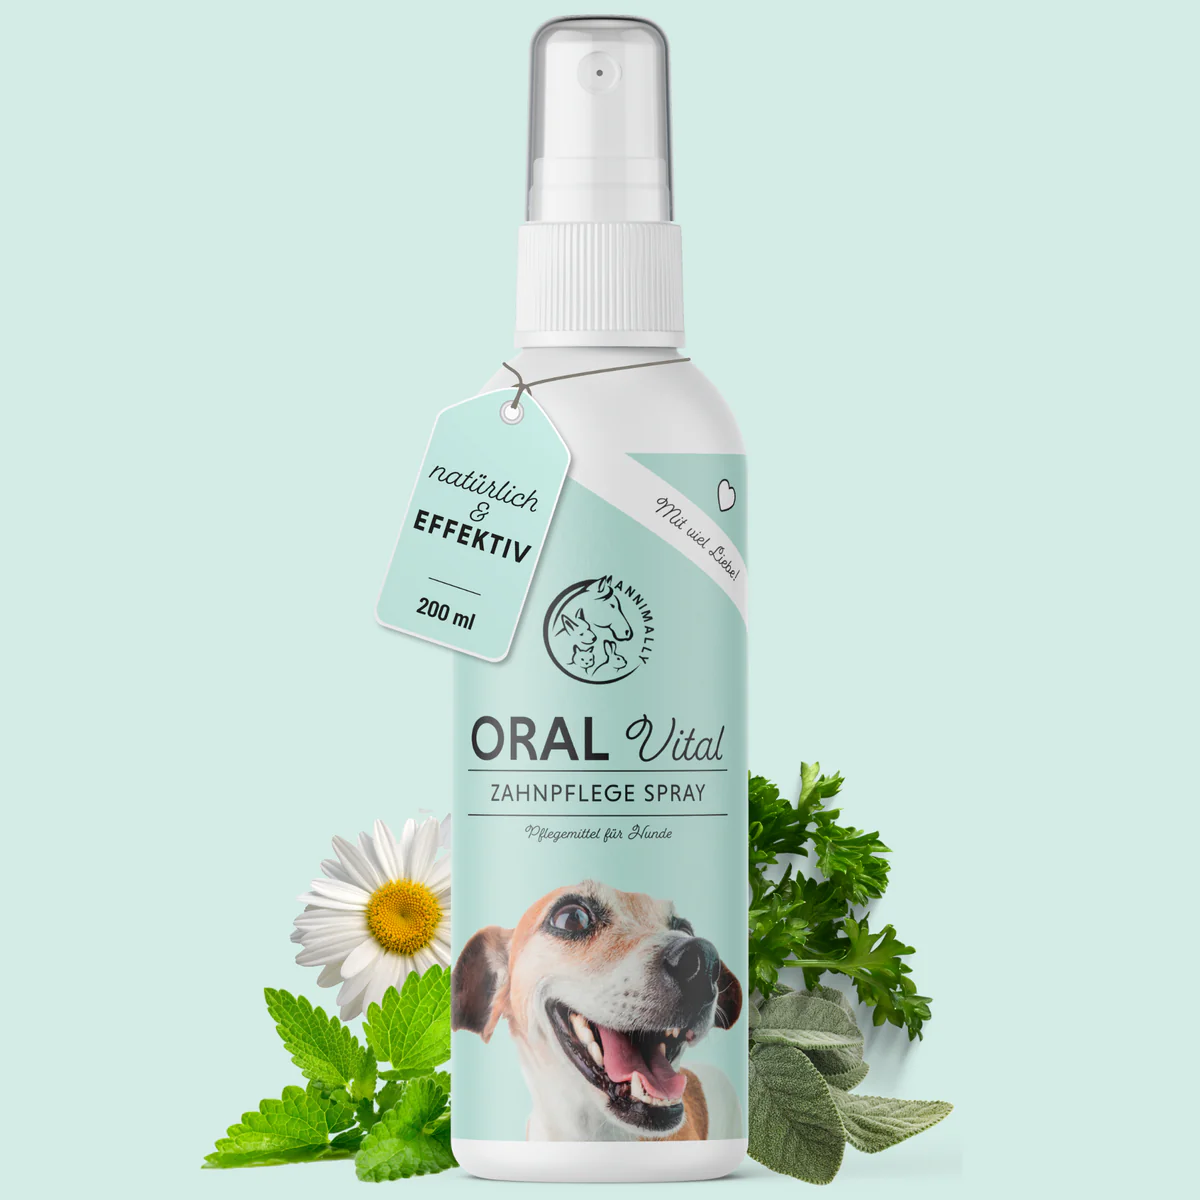 Oral Vital dental spray for dogs from Annimally